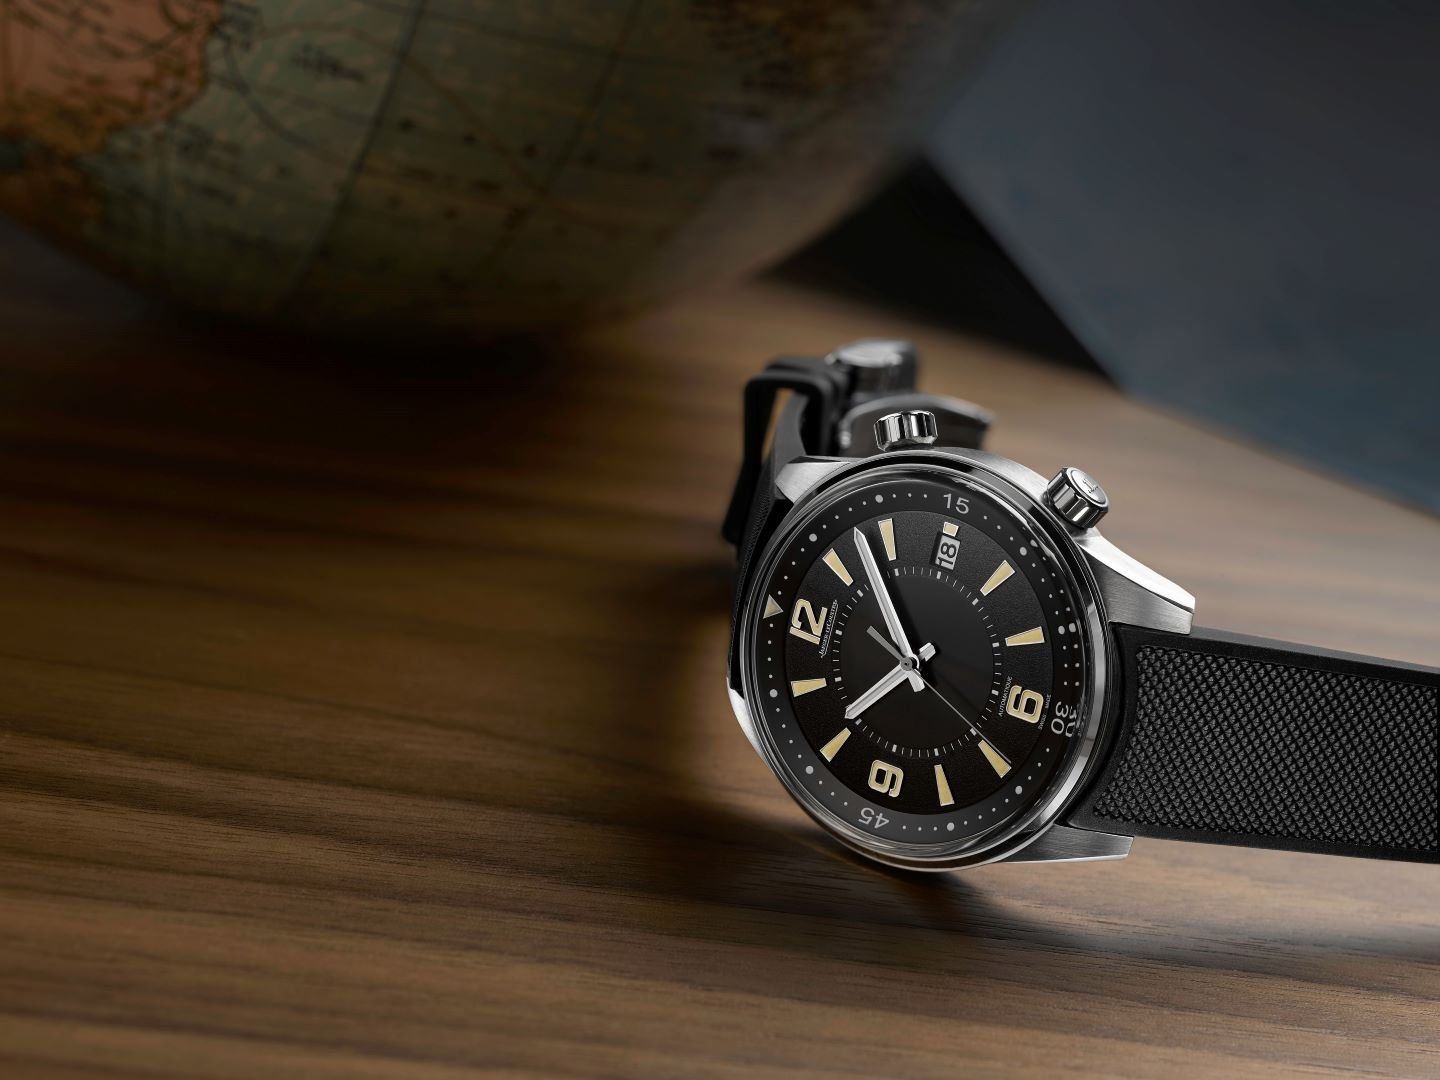 Jaeger-LeCoultre Polaris from 2018